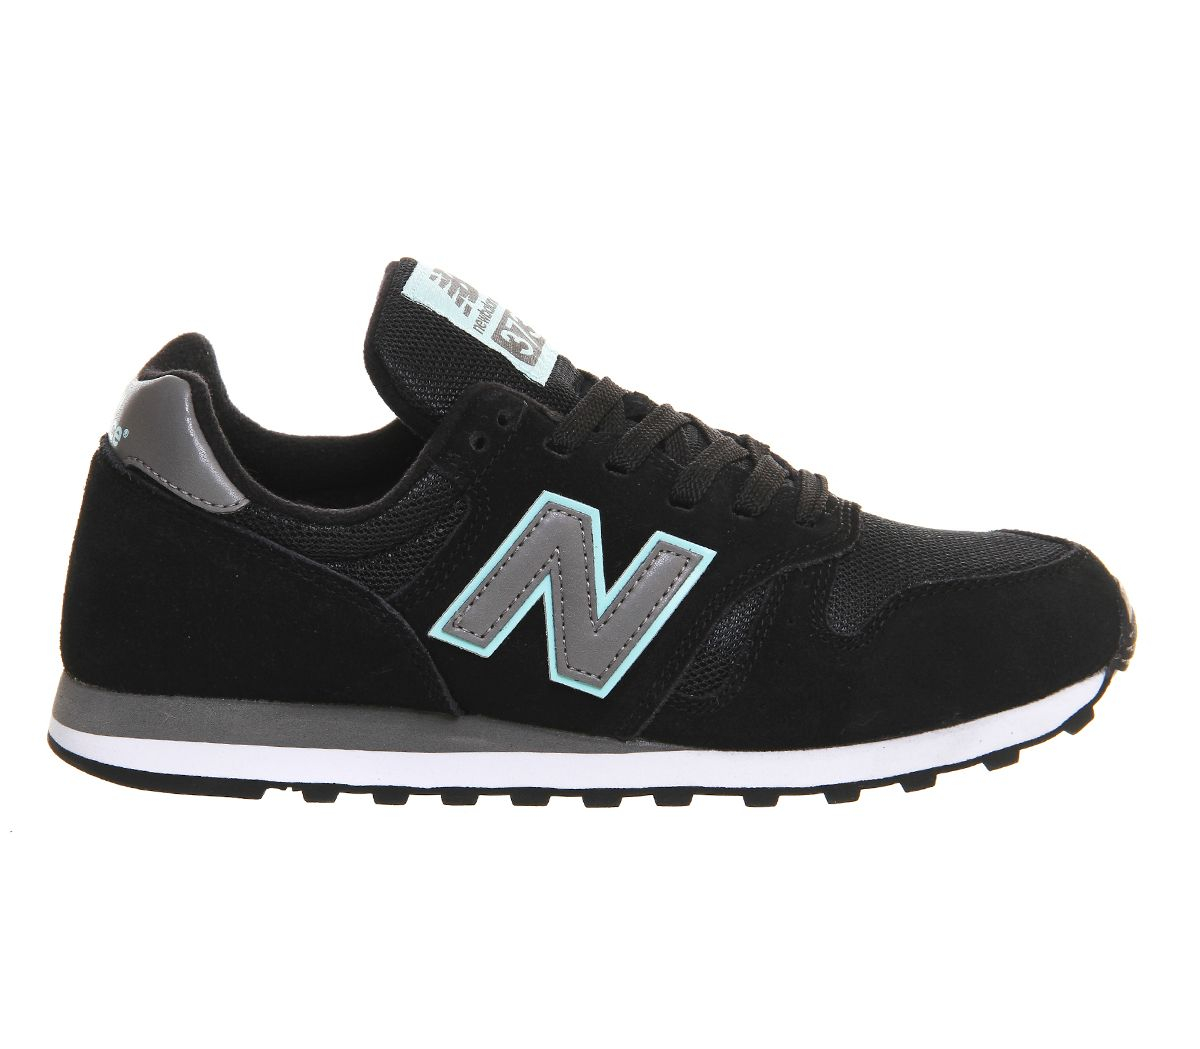 New balance Ml373 Trainers in Black | Lyst